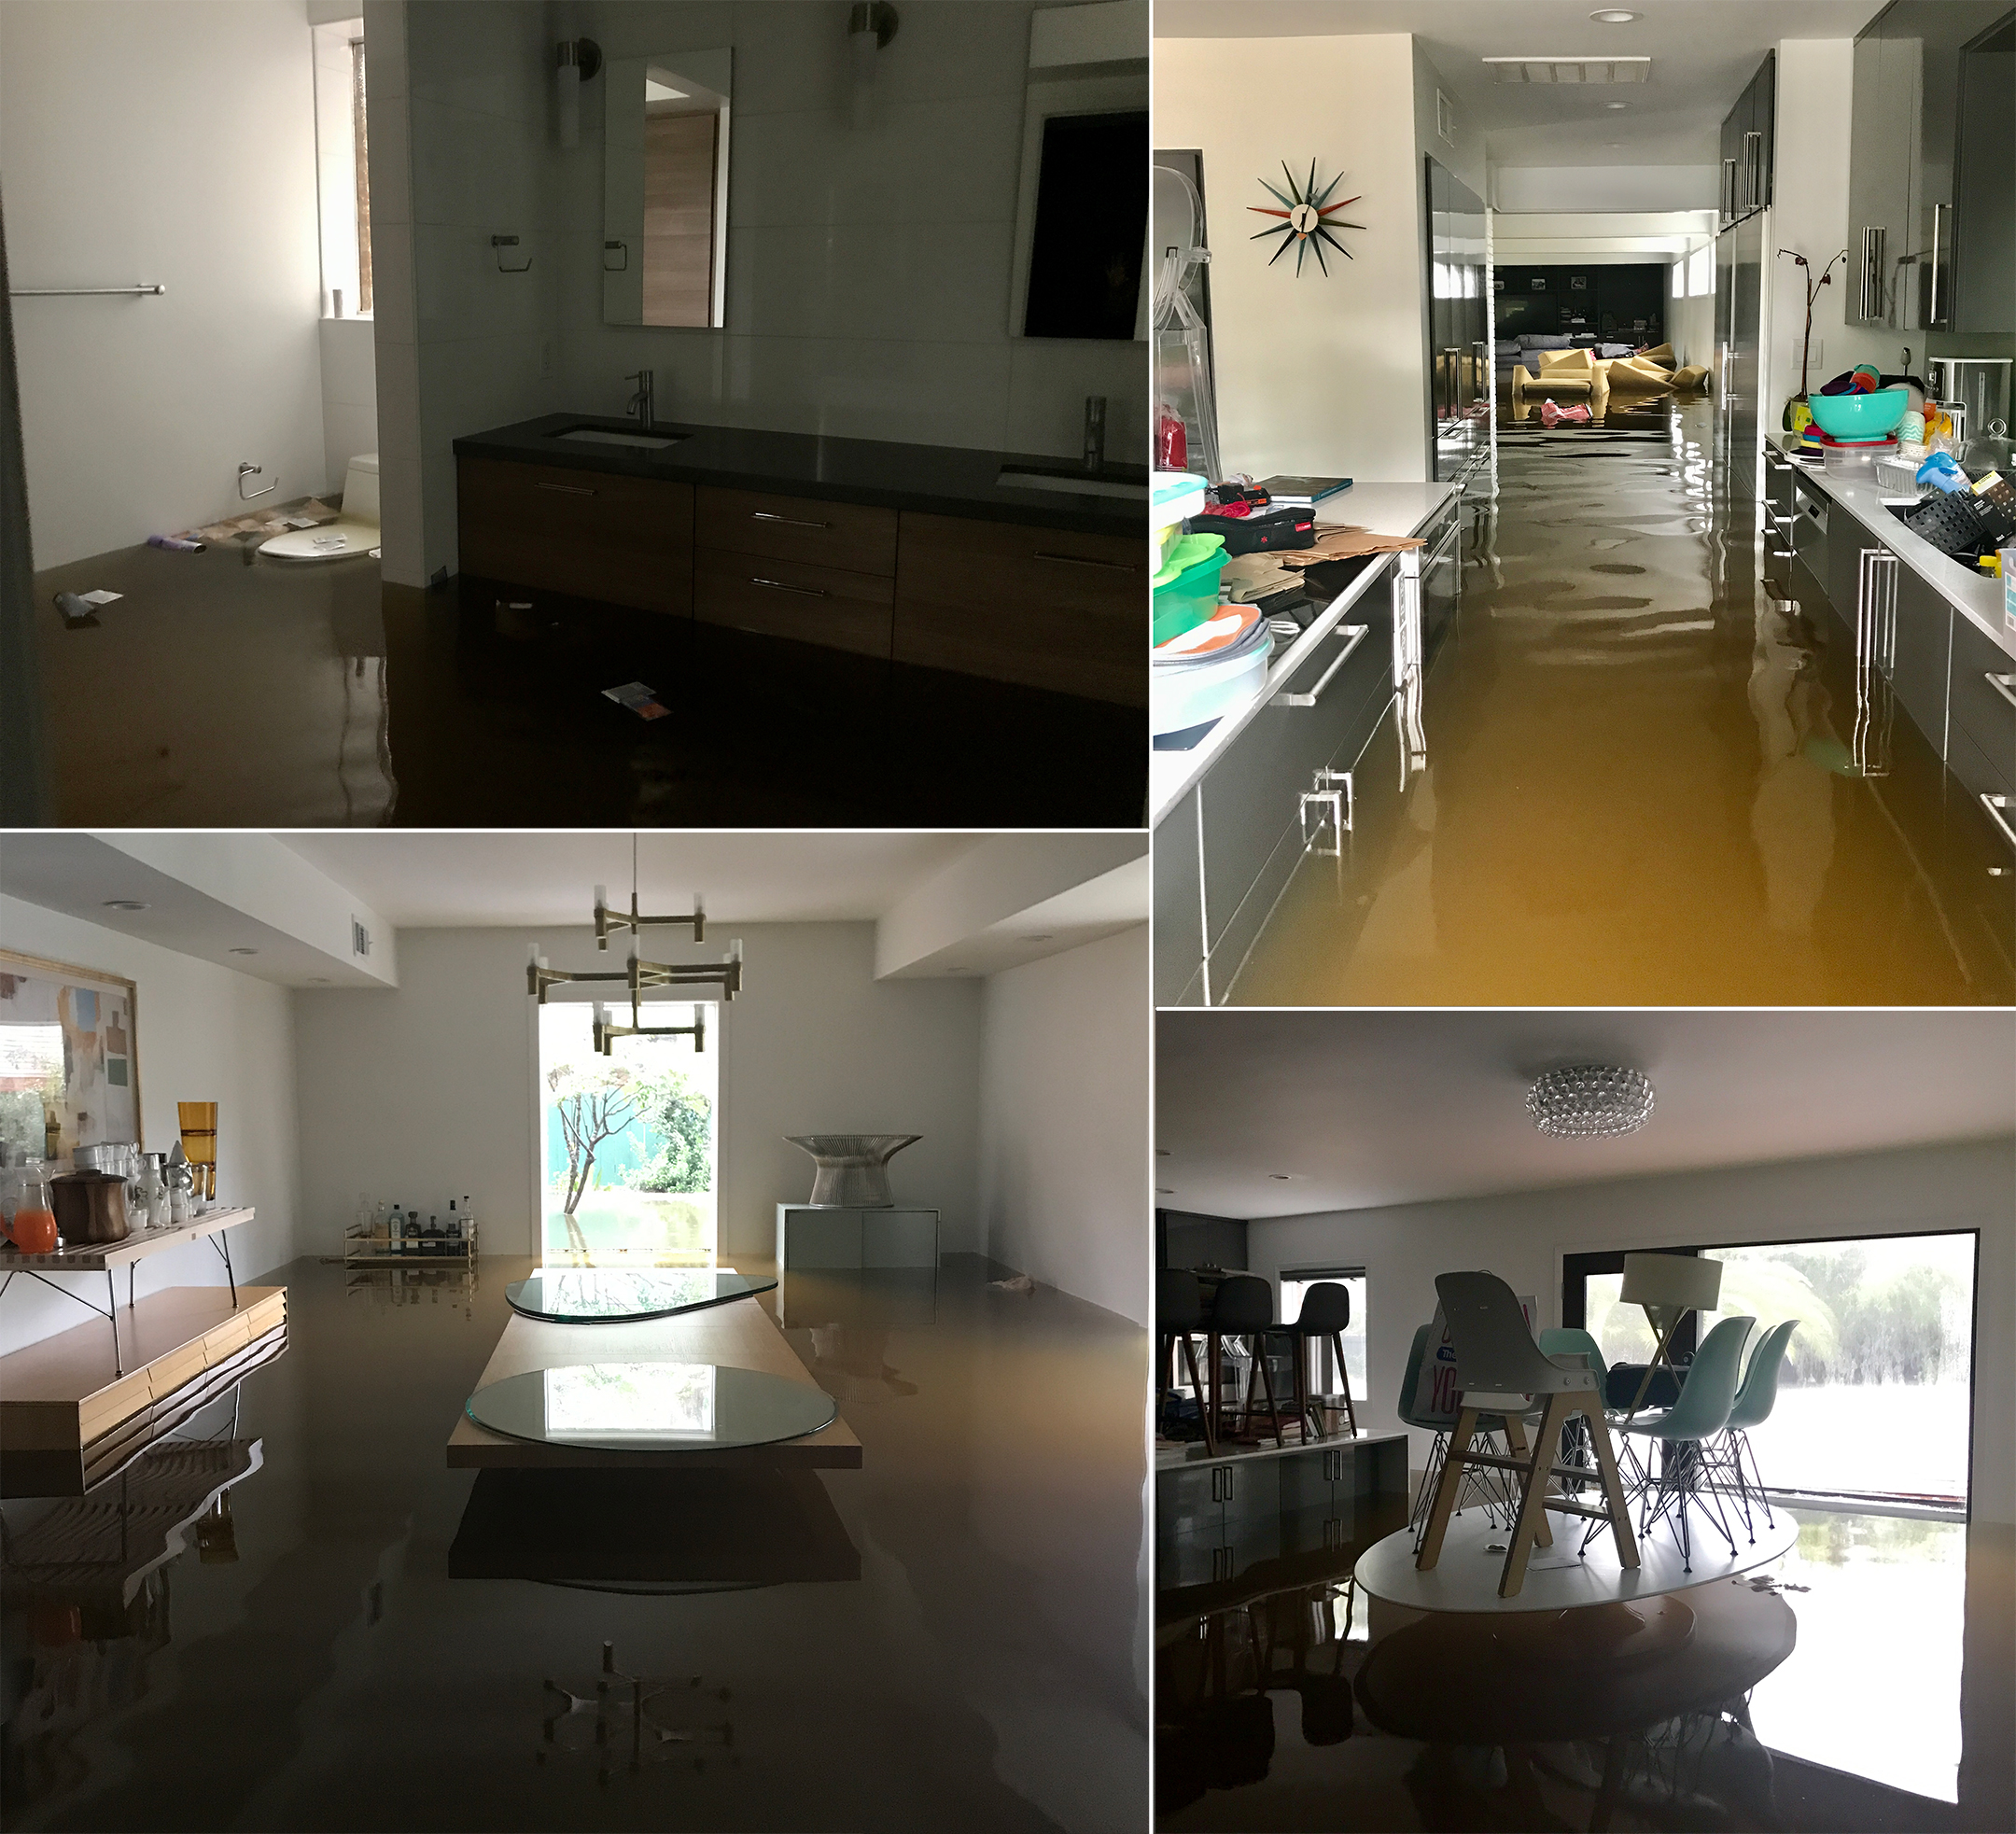 Grid of four photos, two by two, documenting dirty brown storm waters flooding, clockwise from top left, the bathroom up to the toilet seat, the kitchen midway to the top of the counters, a leaving room up to a table top, and a dining room nearly to the top of the table